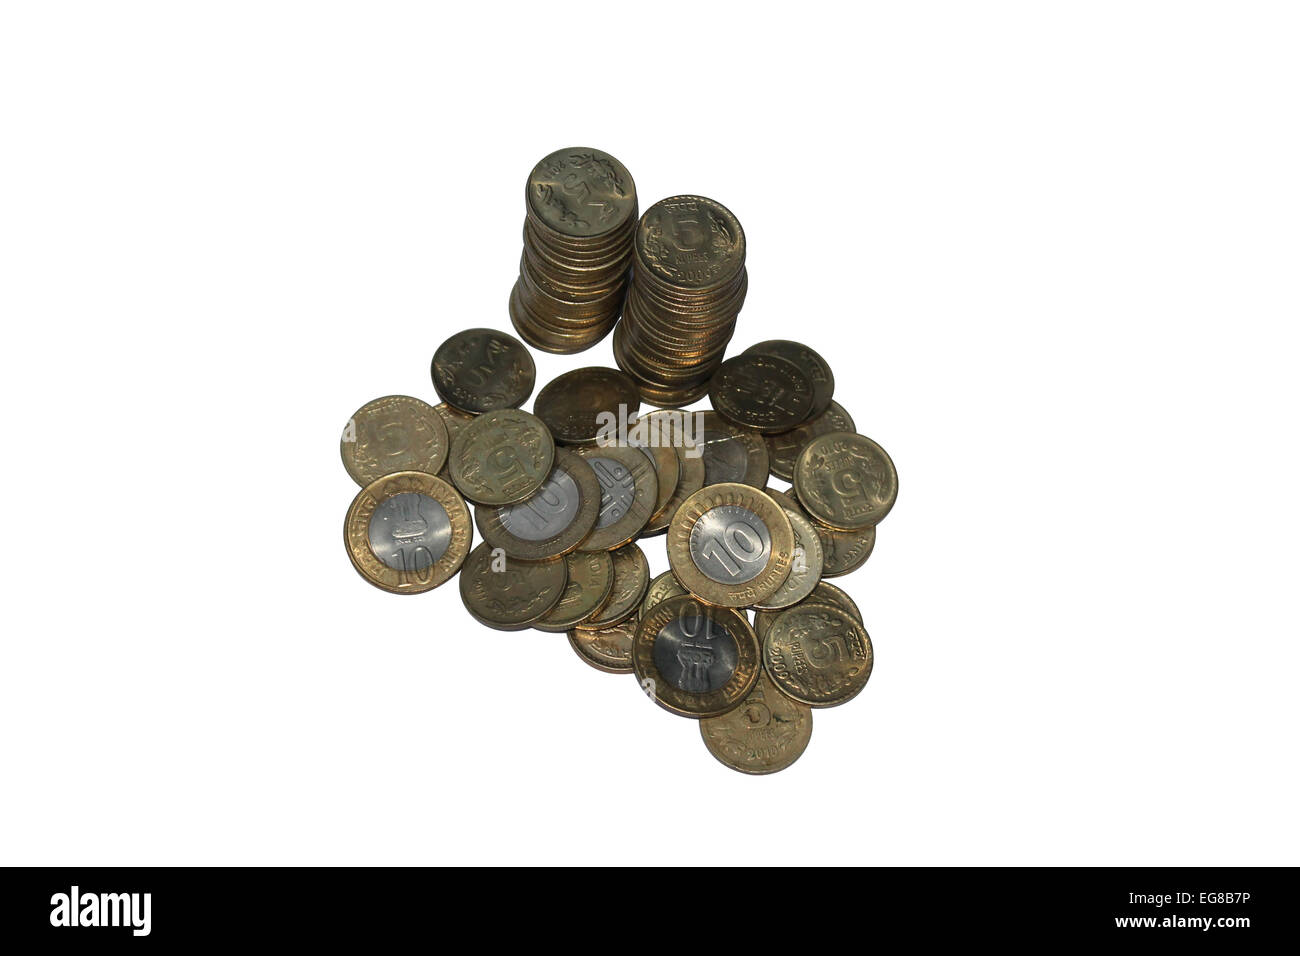 5 rupee and 10 rupee coins isolated on white background Stock Photo